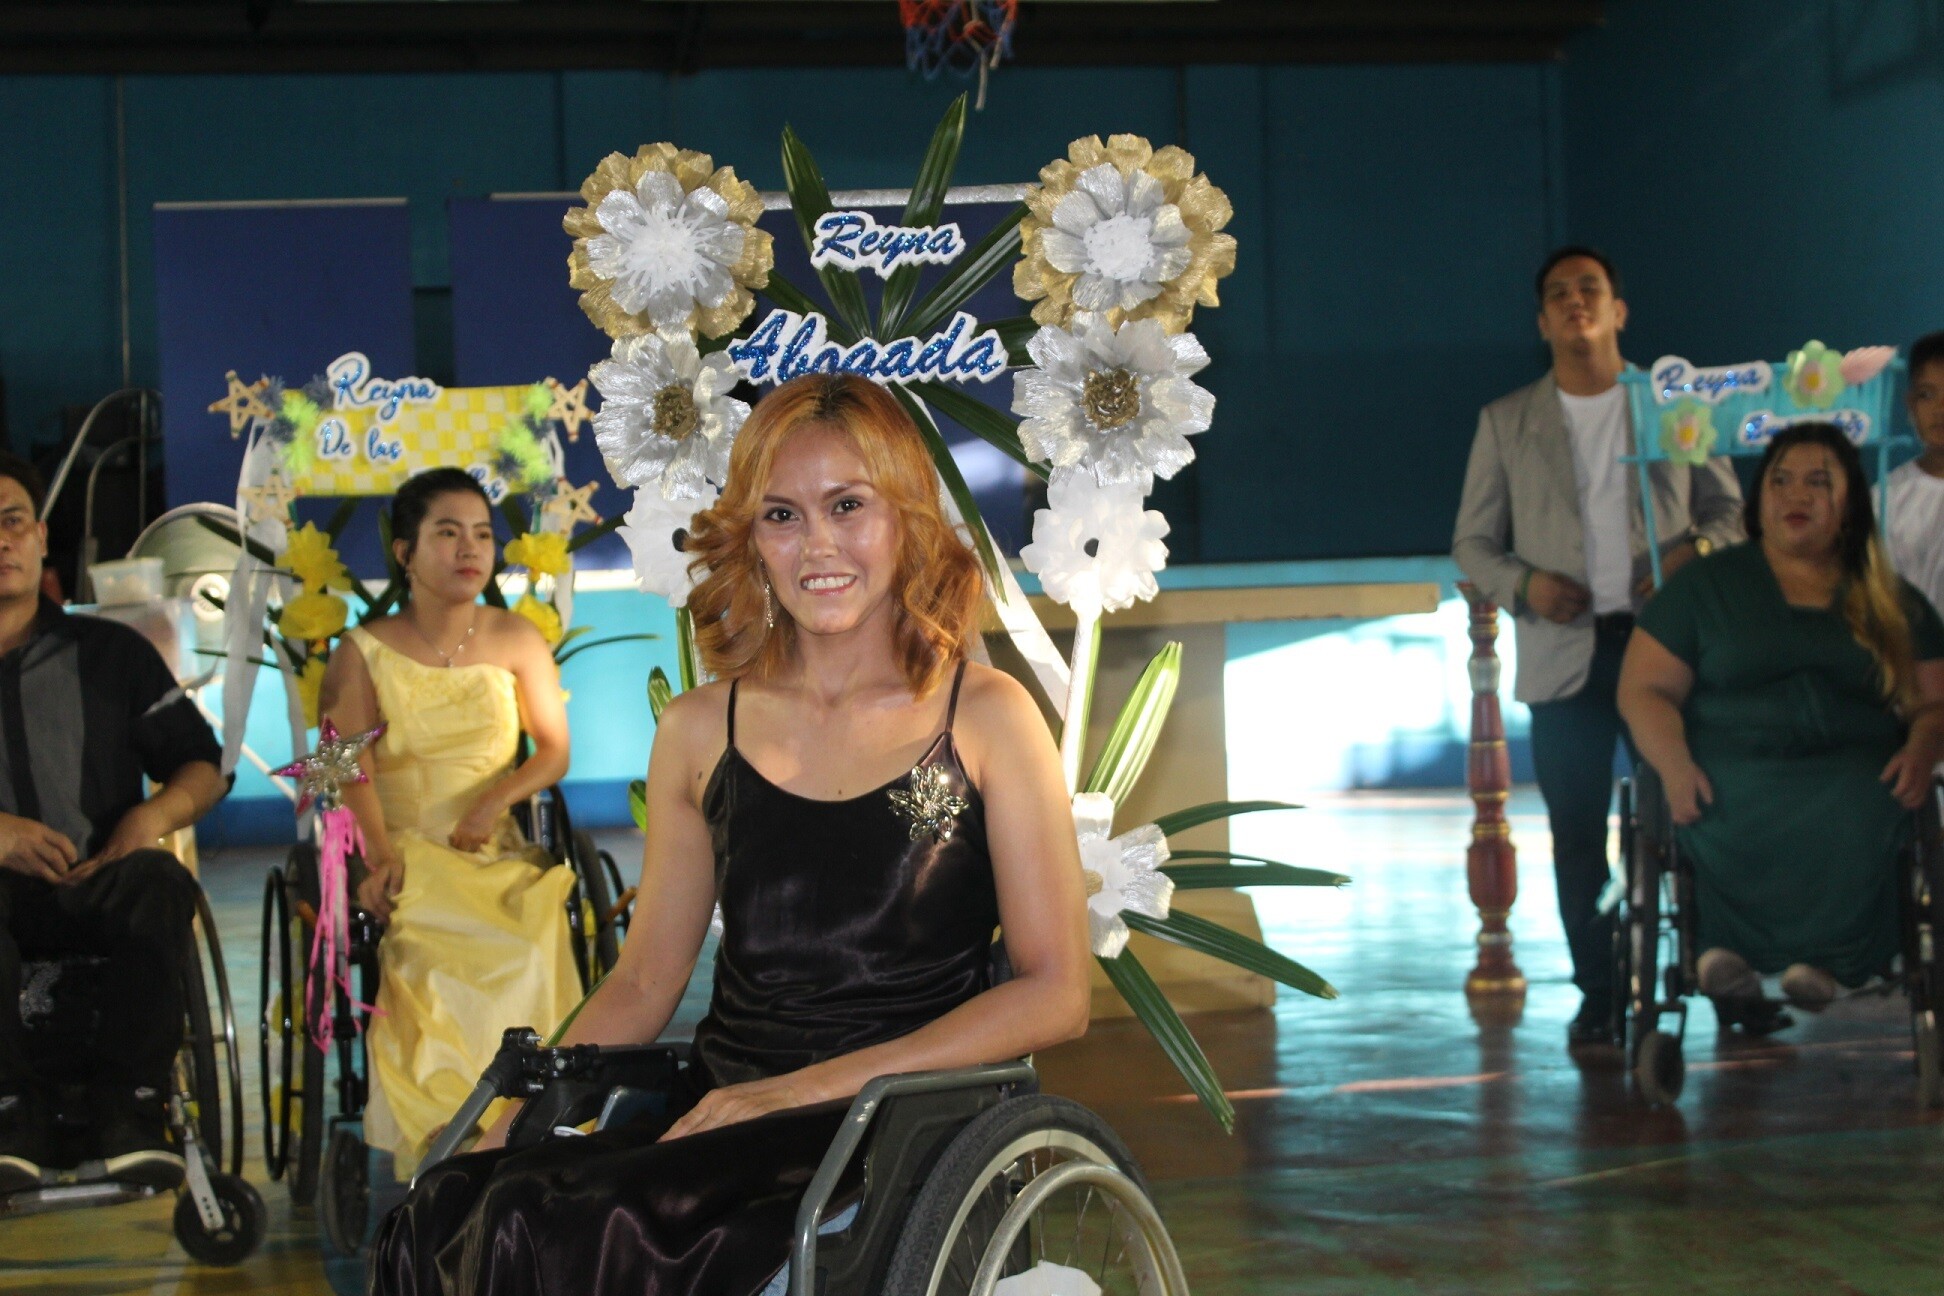 Jobelle, with a black dress and with red-coloured hair, at a party. Her wheelchair is decorated with flowers. Other wheelchair users are in the background.